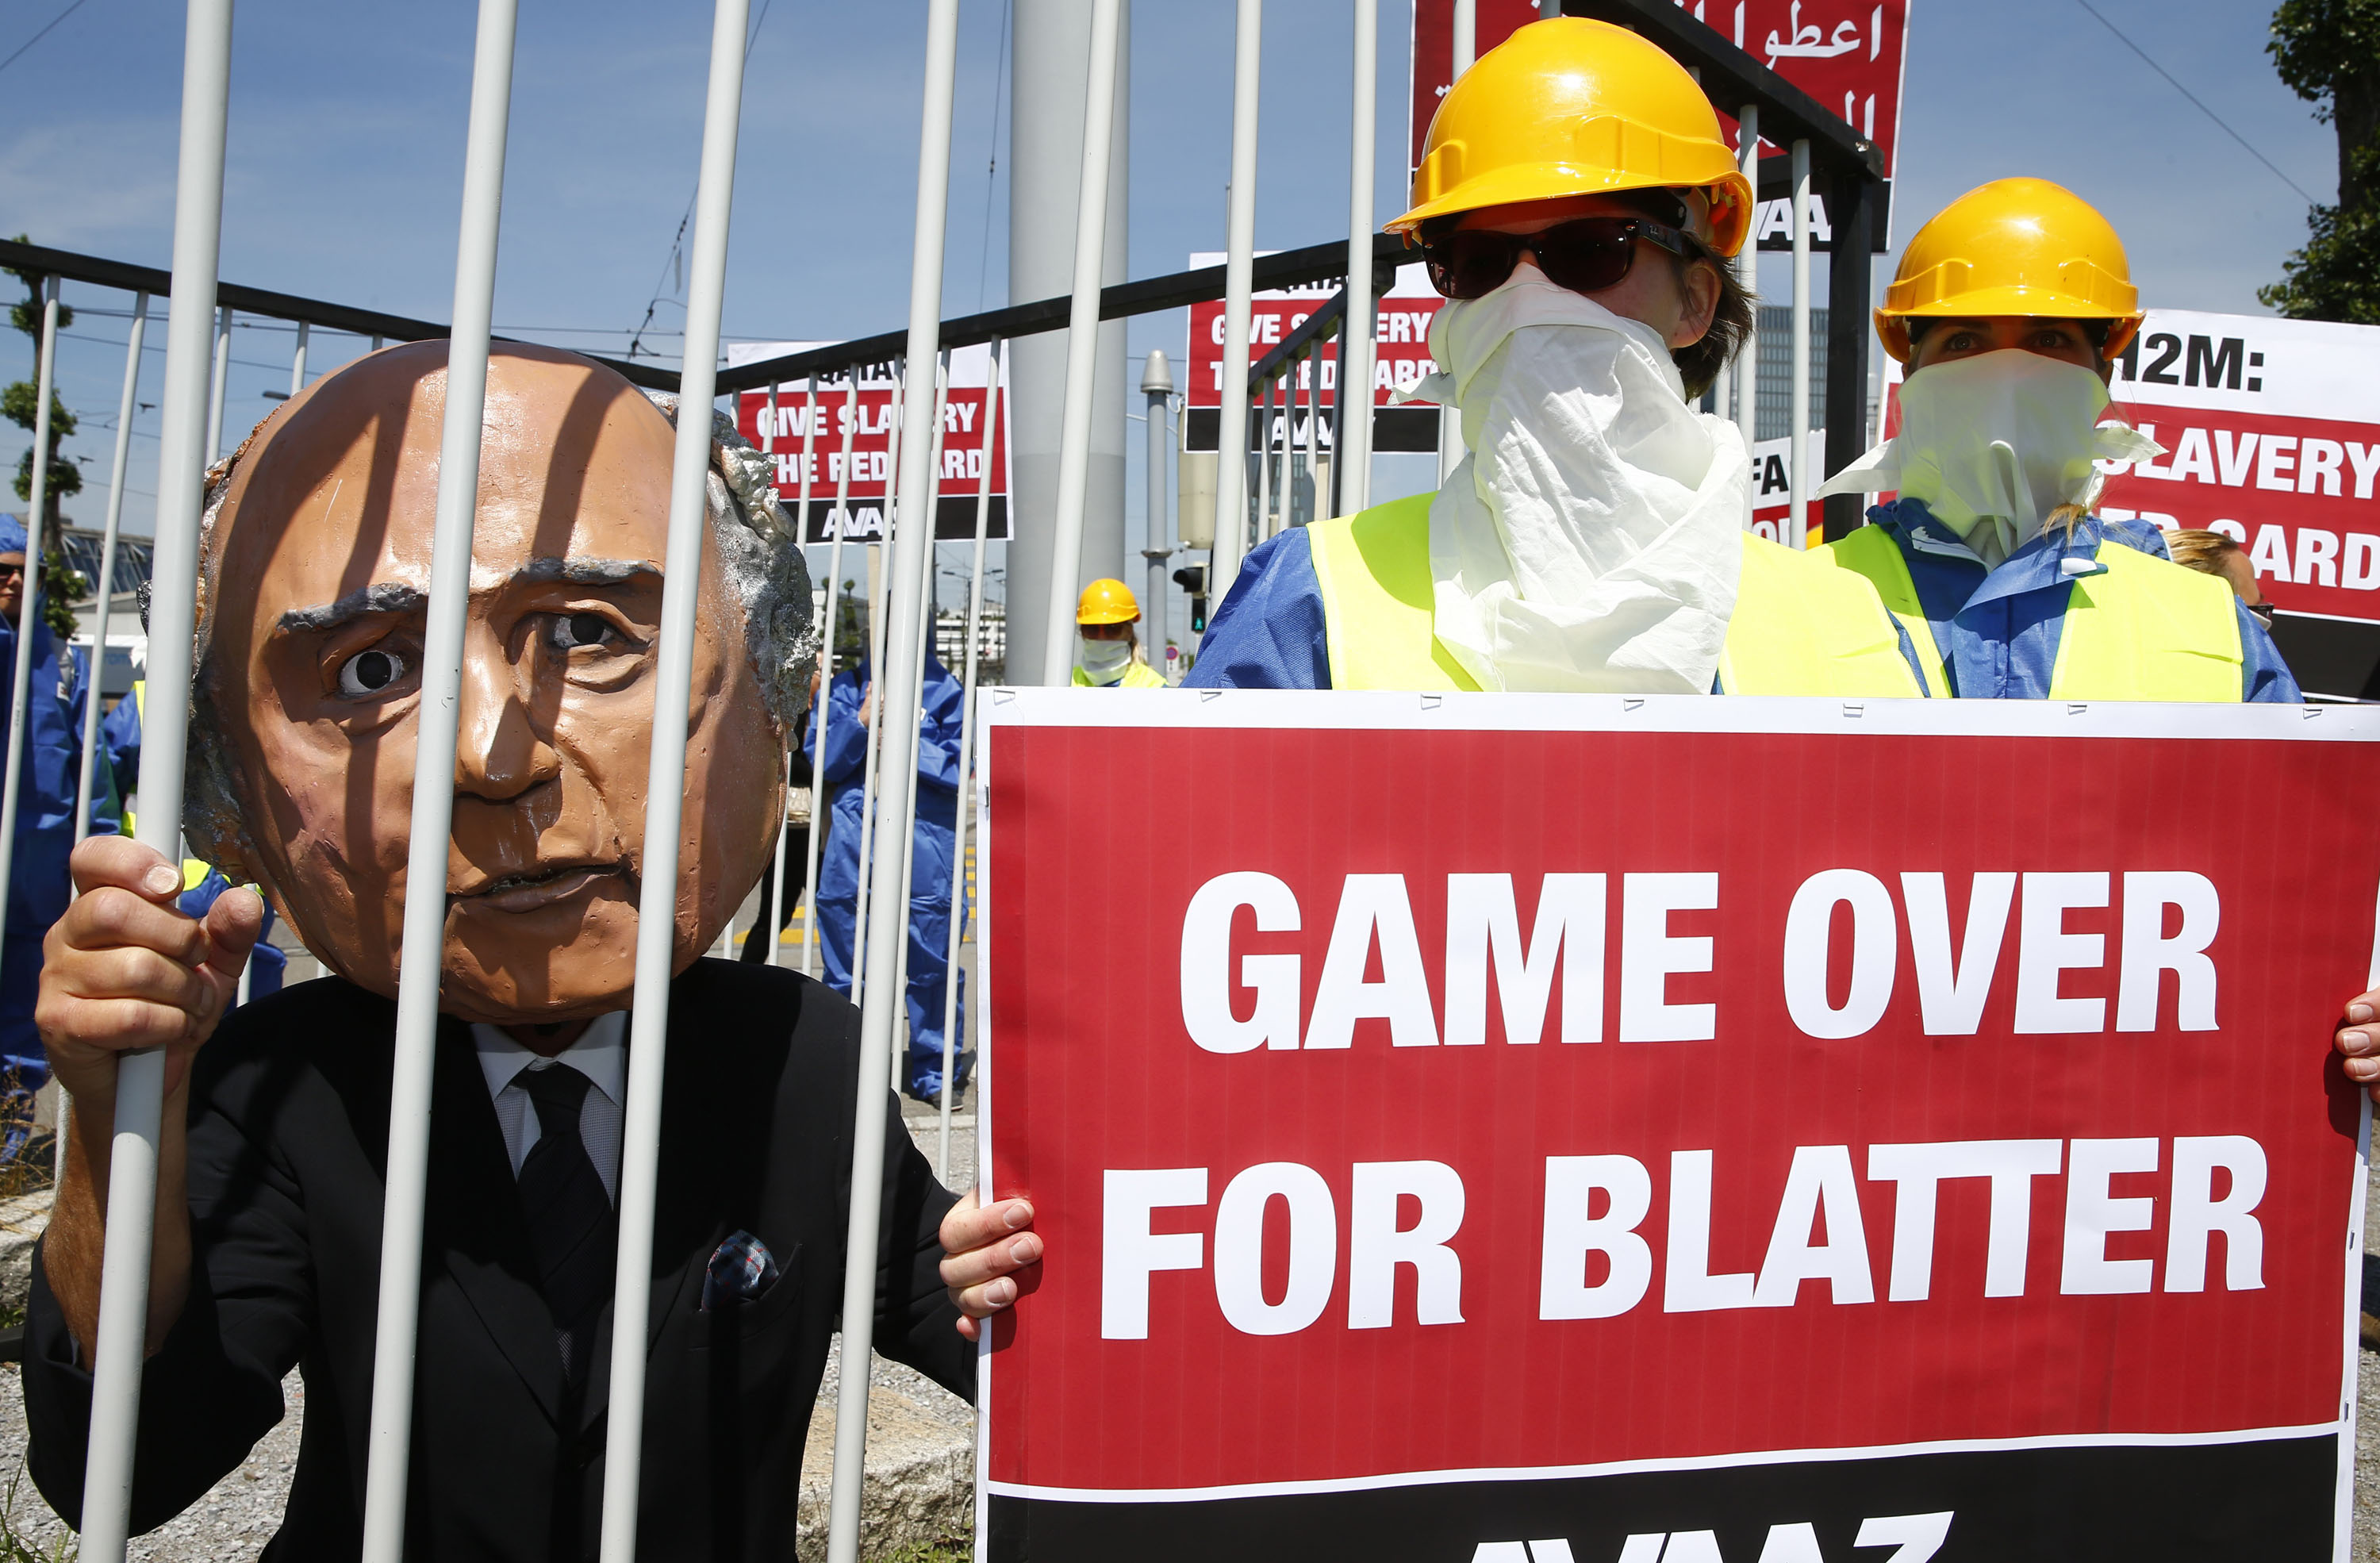 Activists from the advocacy group Avaaz demand the resignation of FIFA President Sepp Blatter at a demonstration in Zurich on May 28. (Arnd Wiegmann—Reuters)